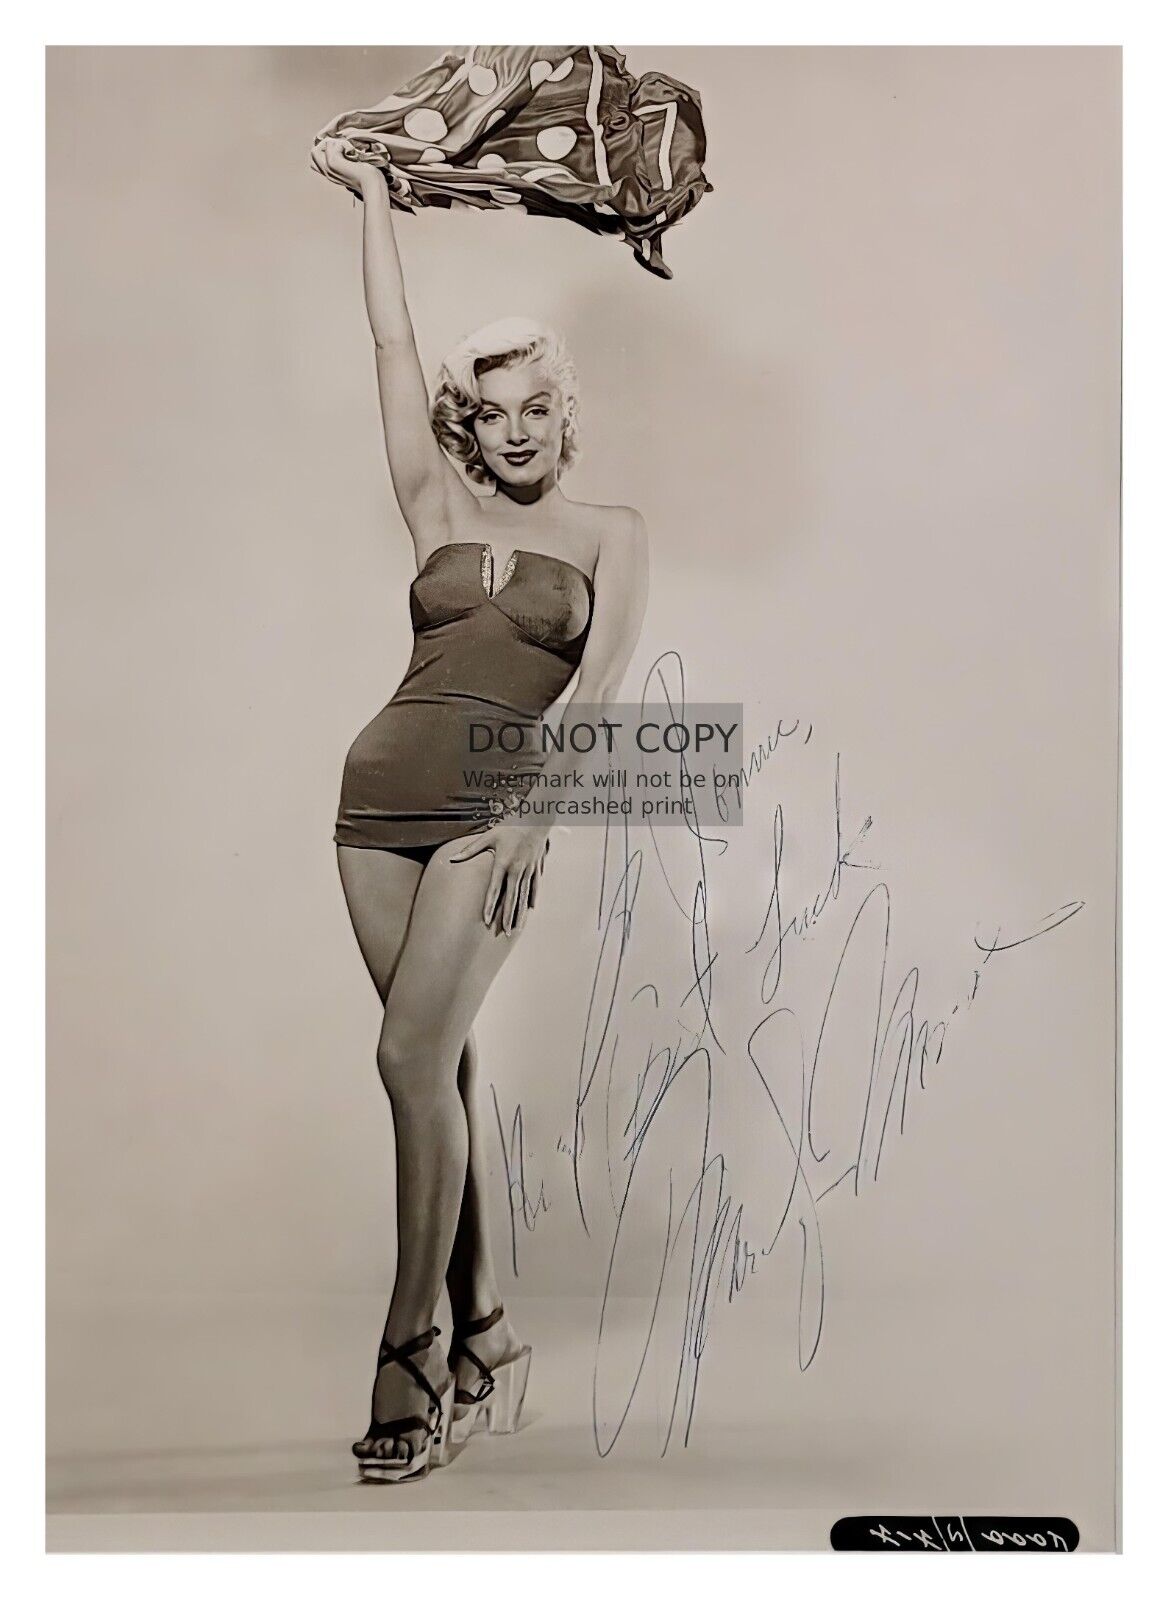 MARILYN MONROE WEARING SWIMSUIT SEXY AUTOGRAPHED 1953 5X7 PUBLICITY PHOTO